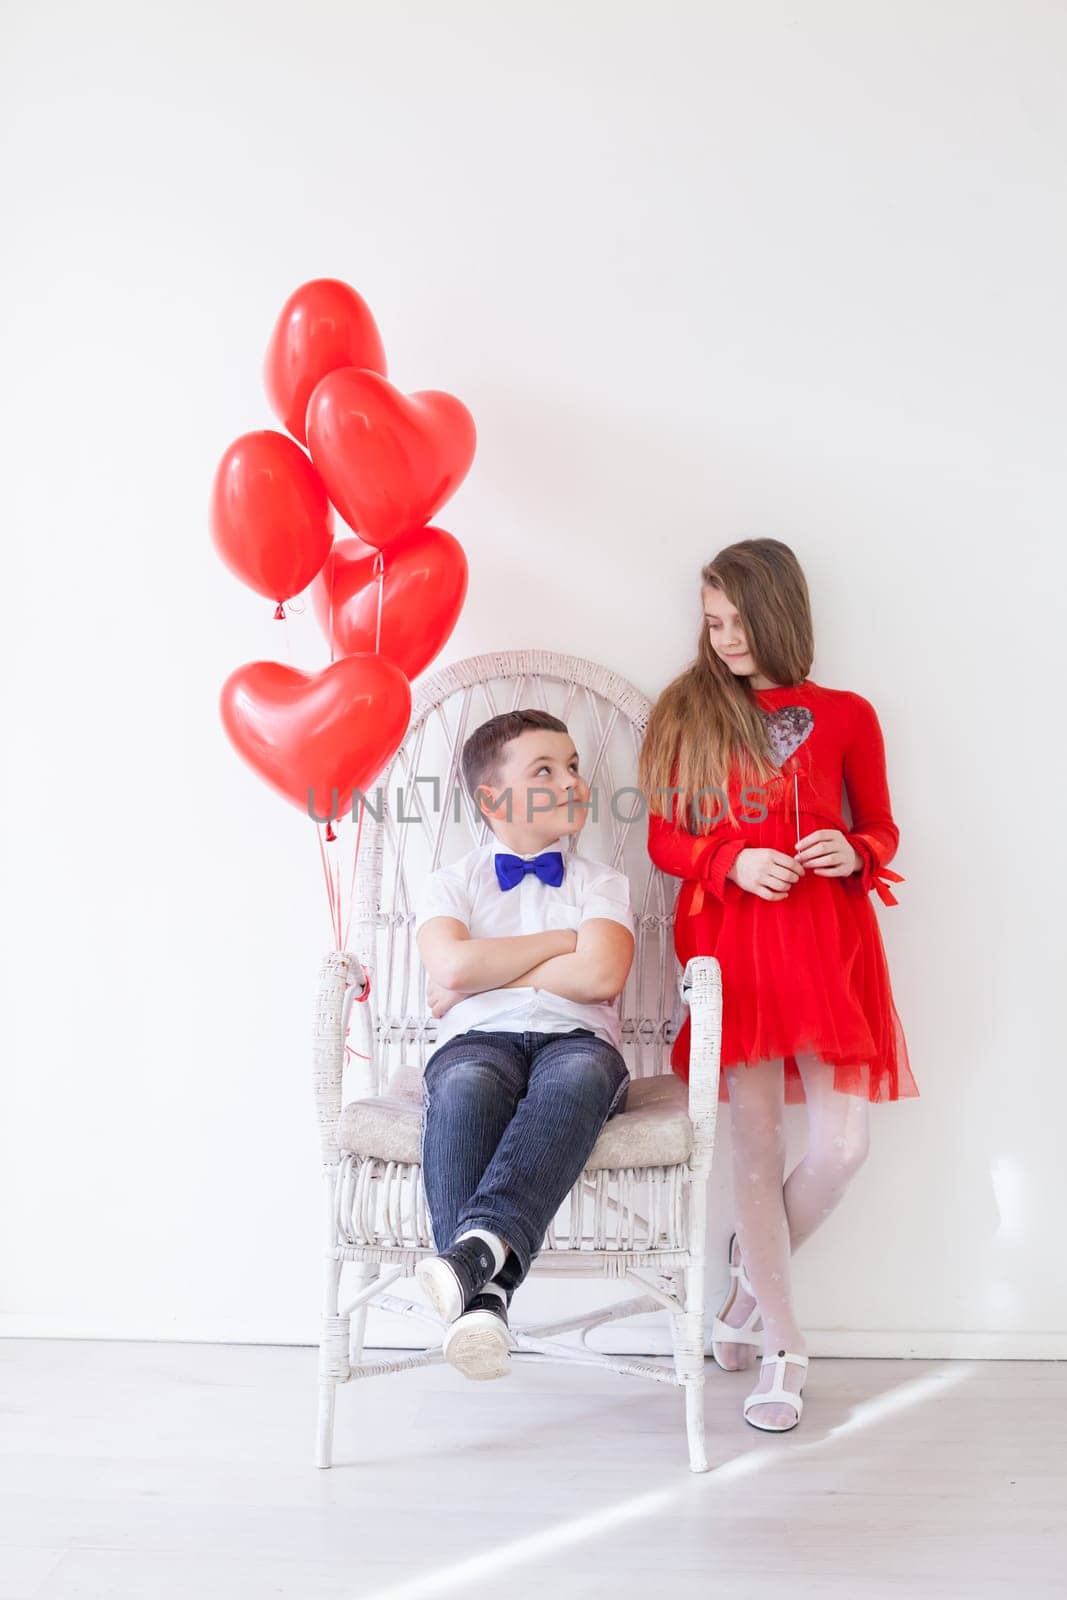 Boy and girl friends with red balloons on Valentine's Day holiday by Simakov